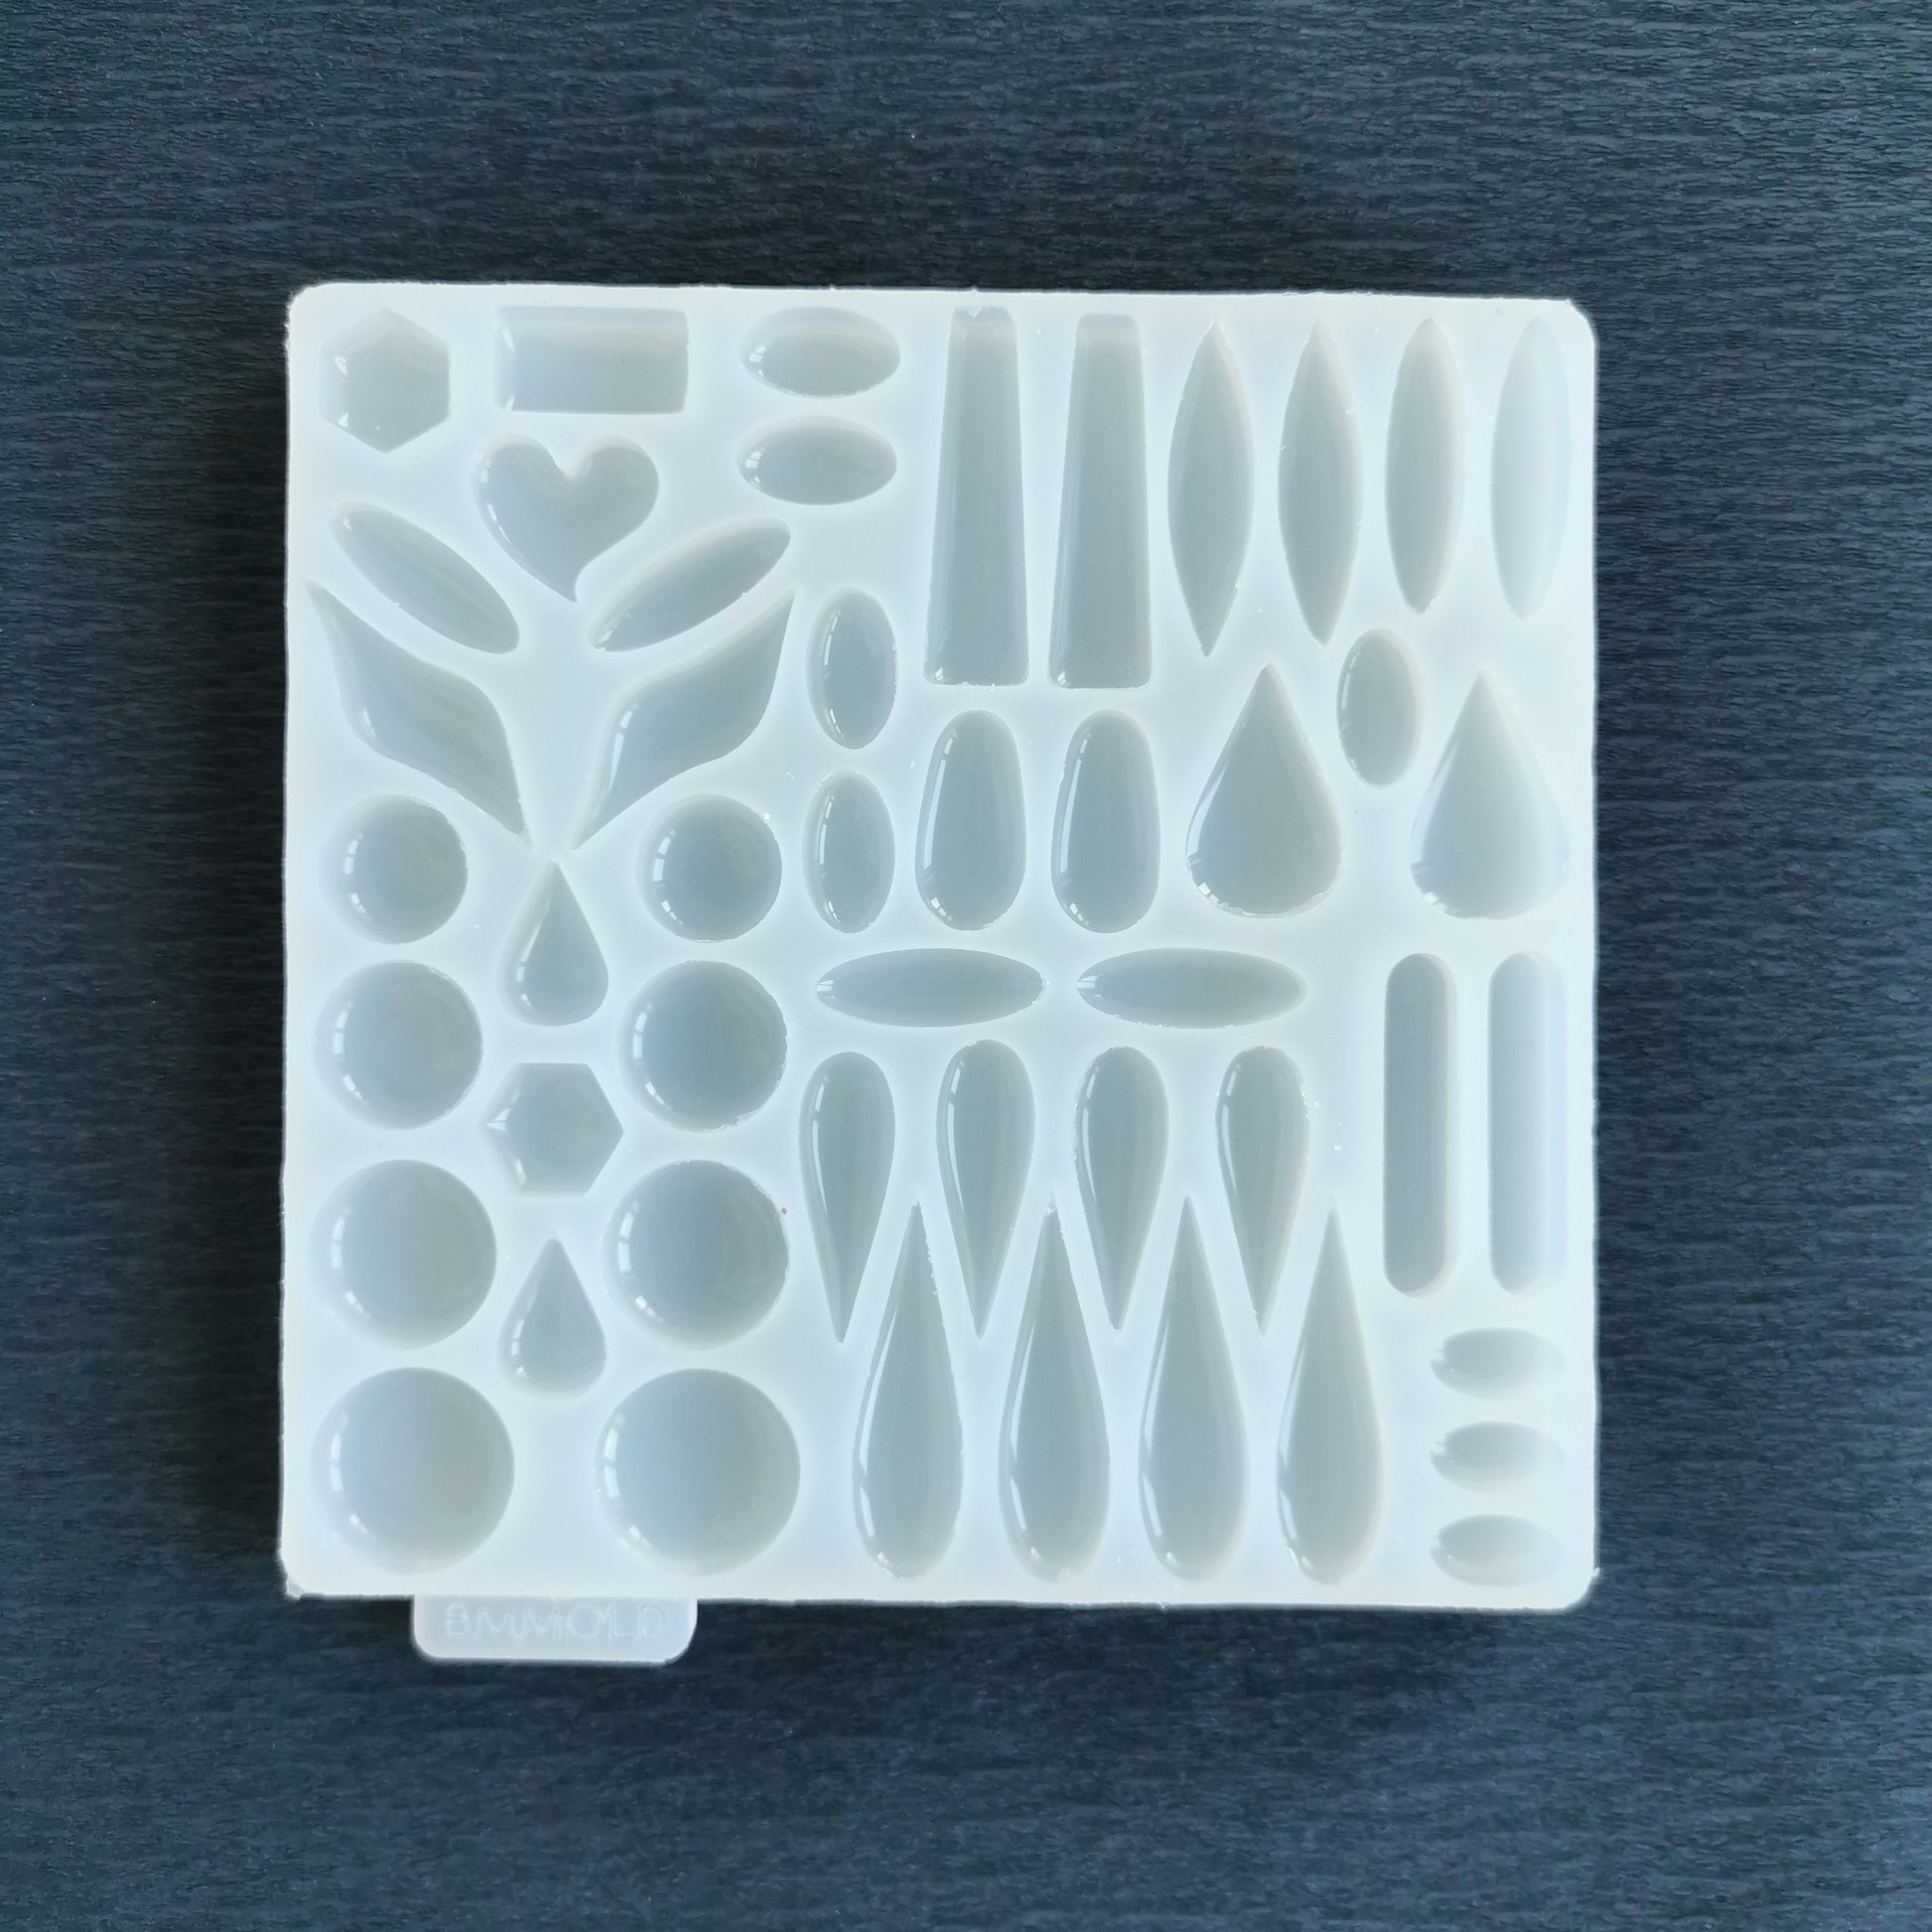 48-in-1 Resin Silicone Mold For Unique Jewelry Pieces